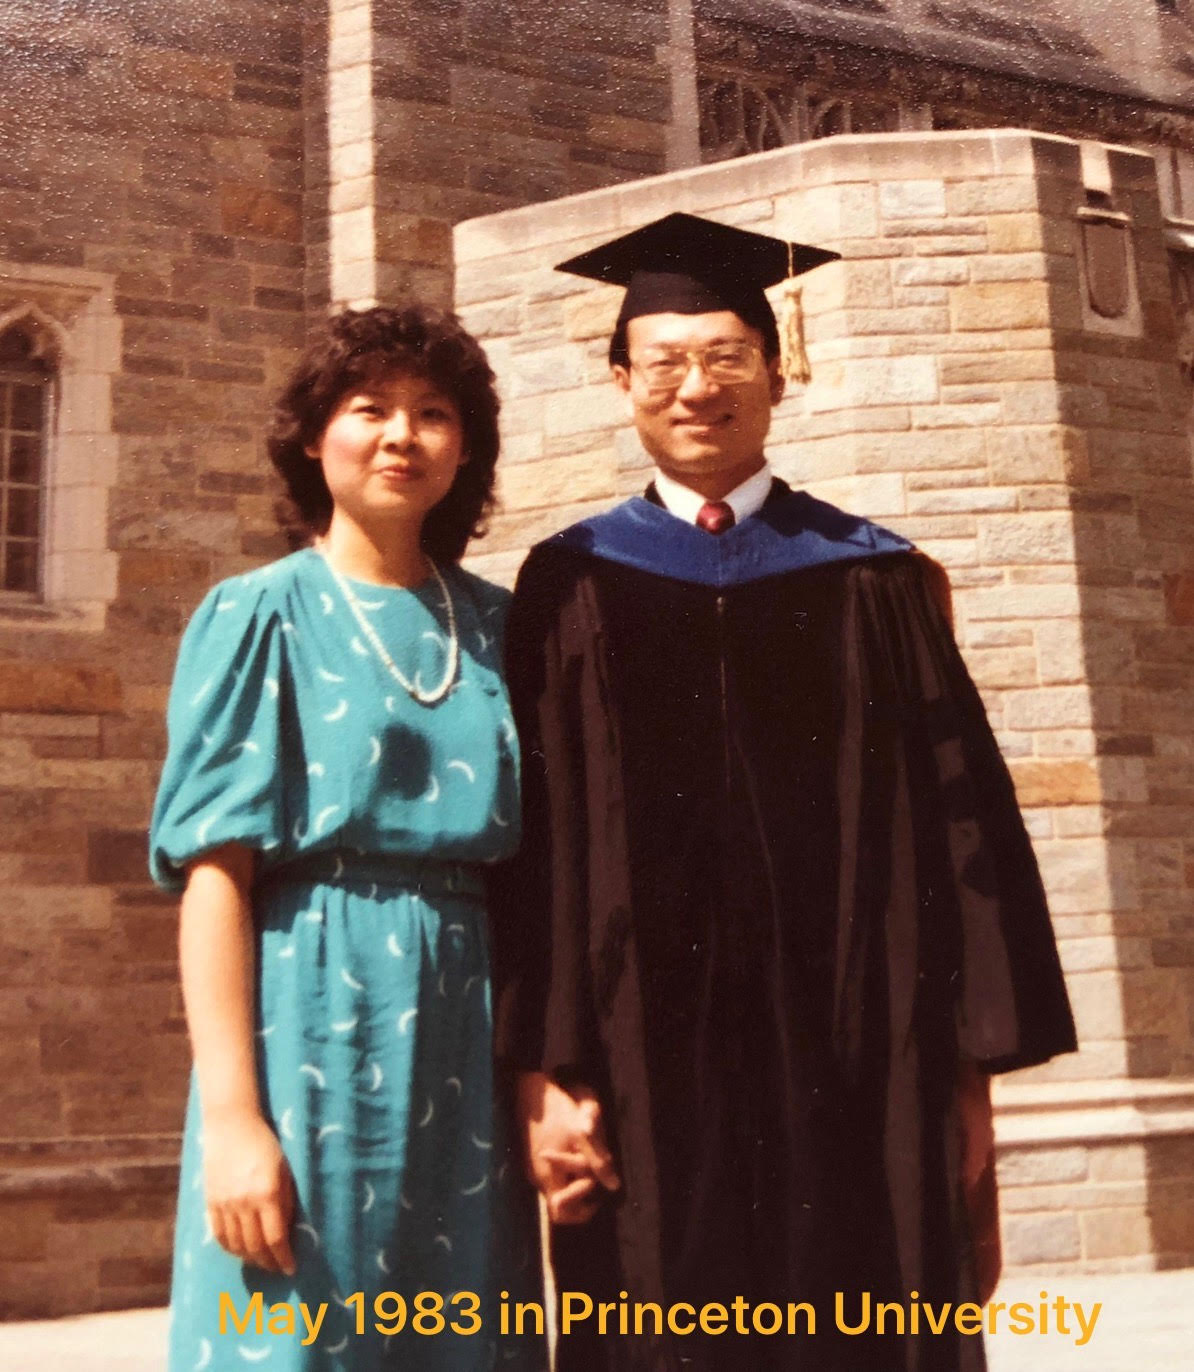 Dr. Kenneth Wu and his wife at Princeton University